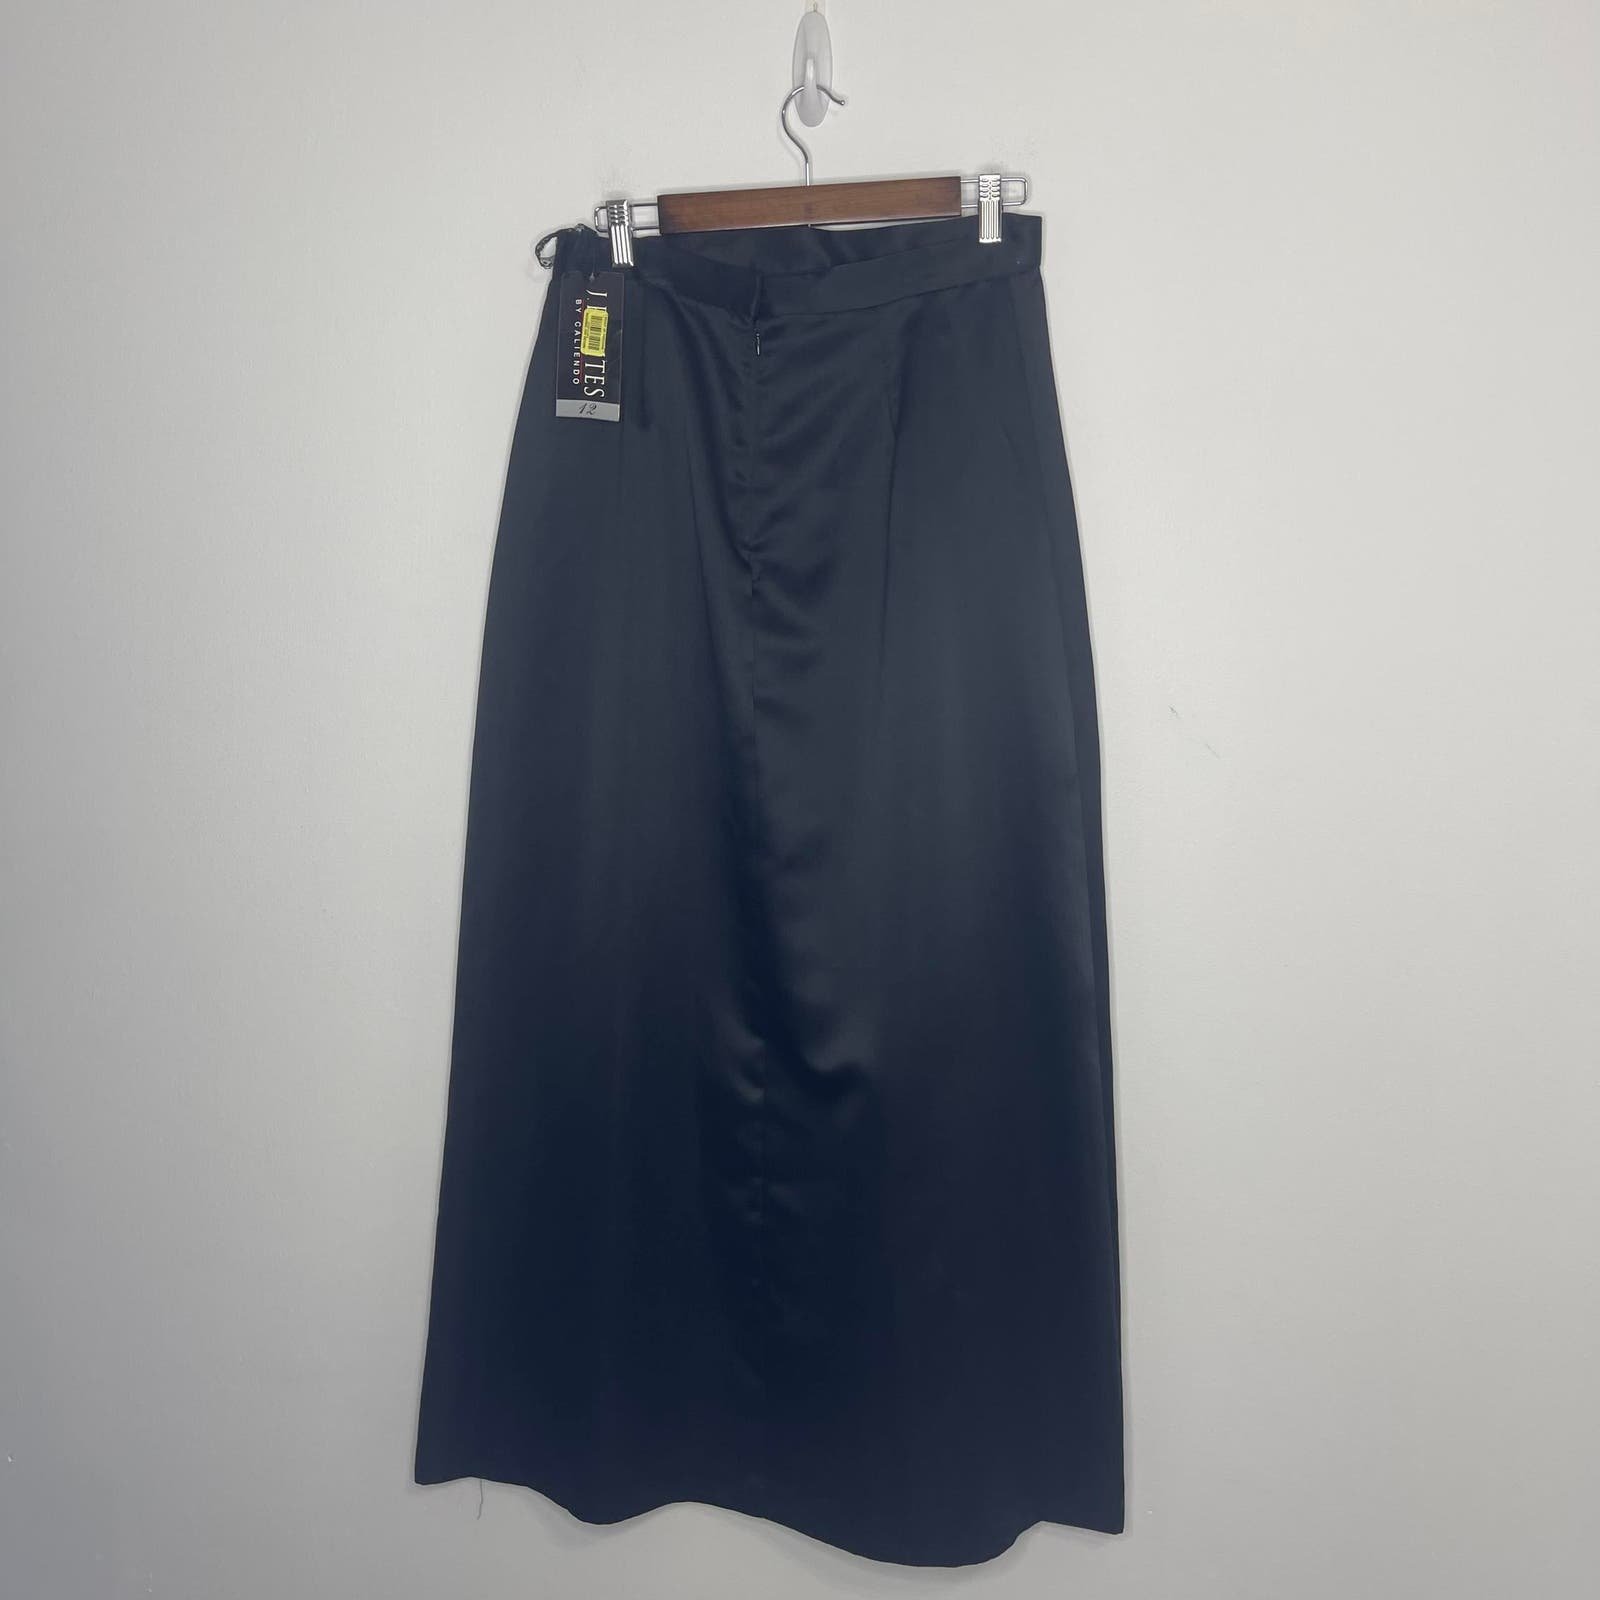 Personality J. R. Nites by Caliendo black long skirt size 12 for women satin formal unlined M0kHMgRJ2 Online Exclusive